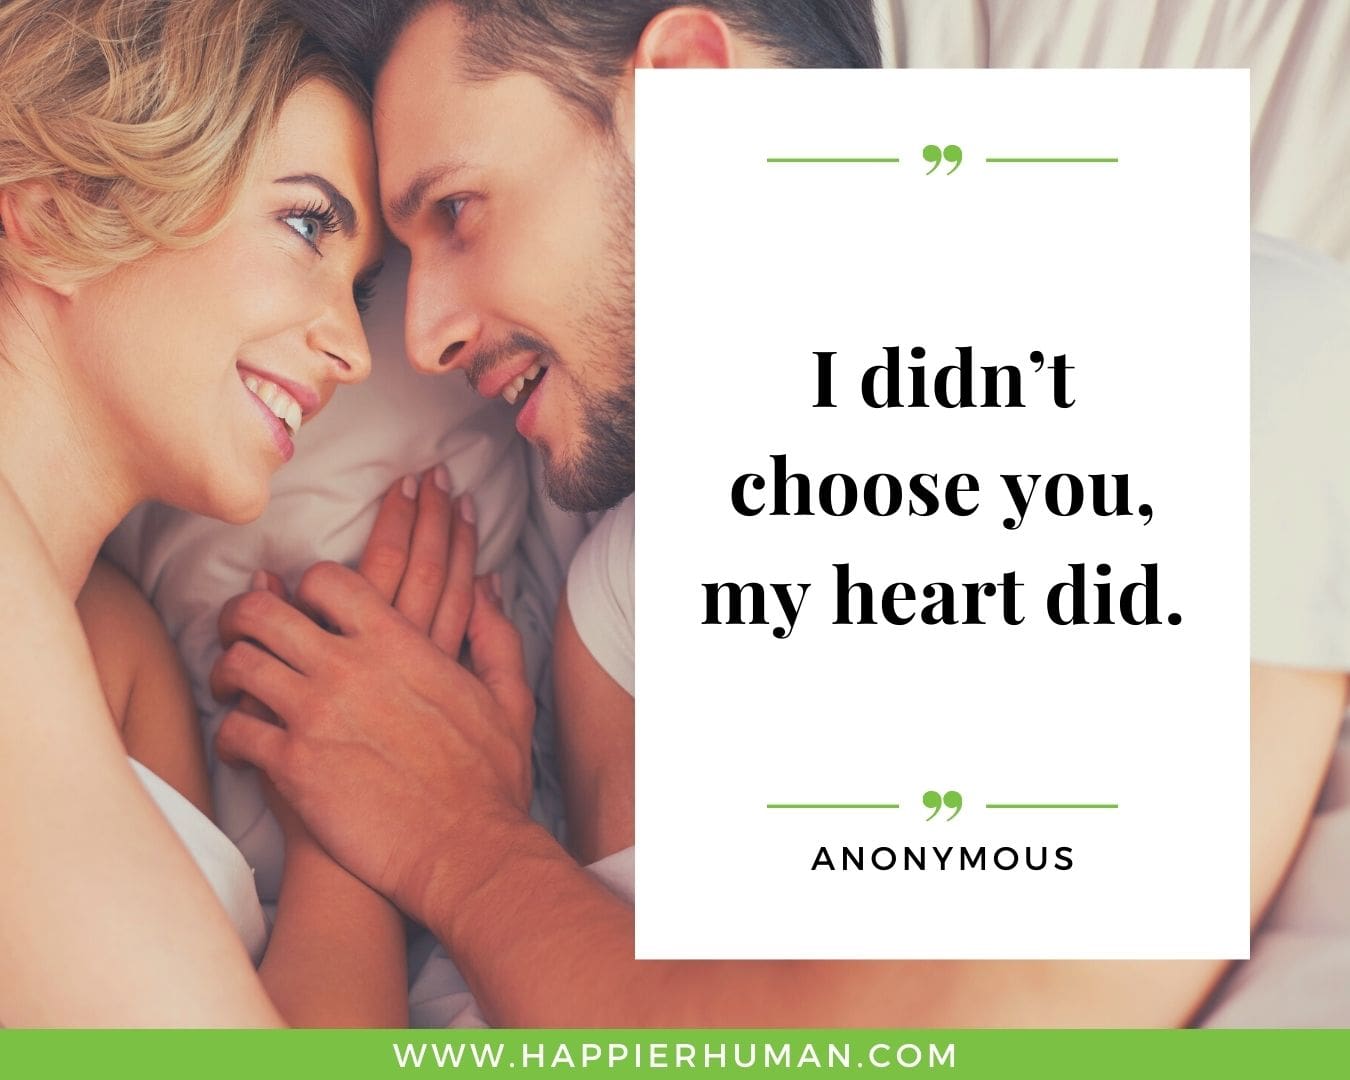 Show her you love her with powerful love quotes- “I didn’t choose you, my heart did.”- Anonymous